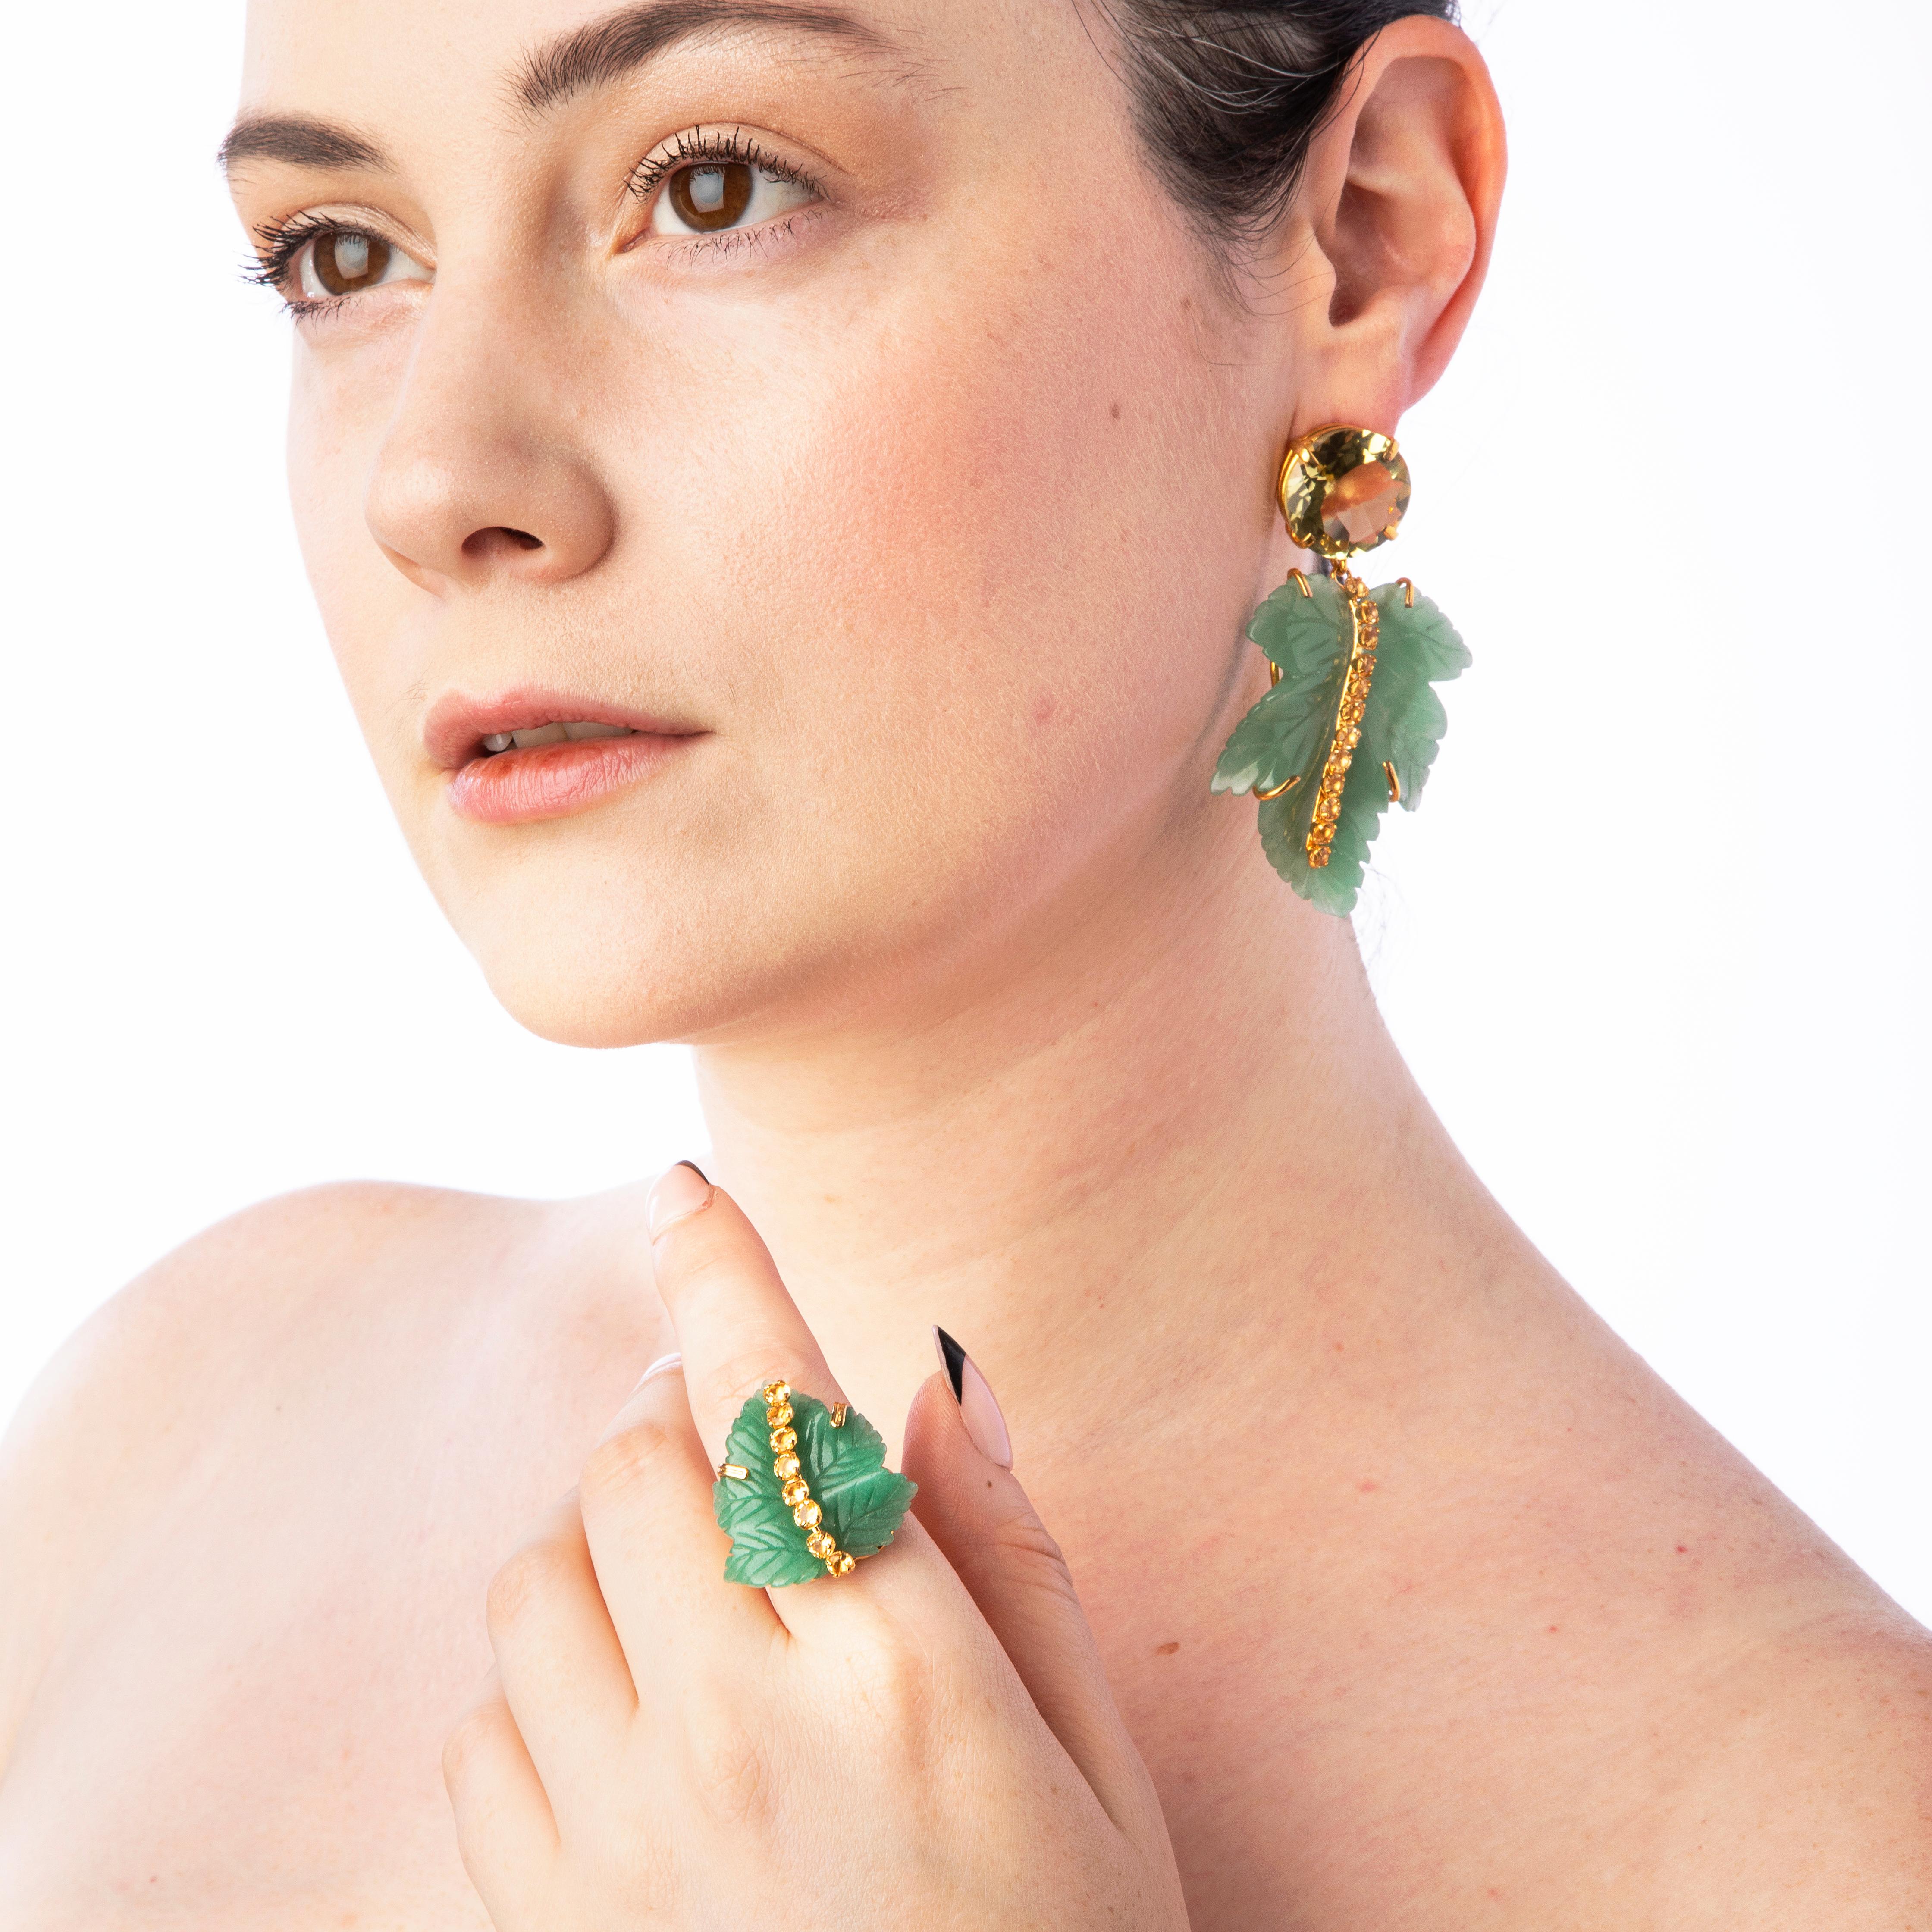 The Jasmine Earrings, crafted from semi-precious materials, feature a leaf design with a removable bottom, allowing for a versatile and simpler style. Inspired by vintage aesthetics.

SKU: ED-LF-90
Stones: Green Aventurine & Lemon Quartz
Material: